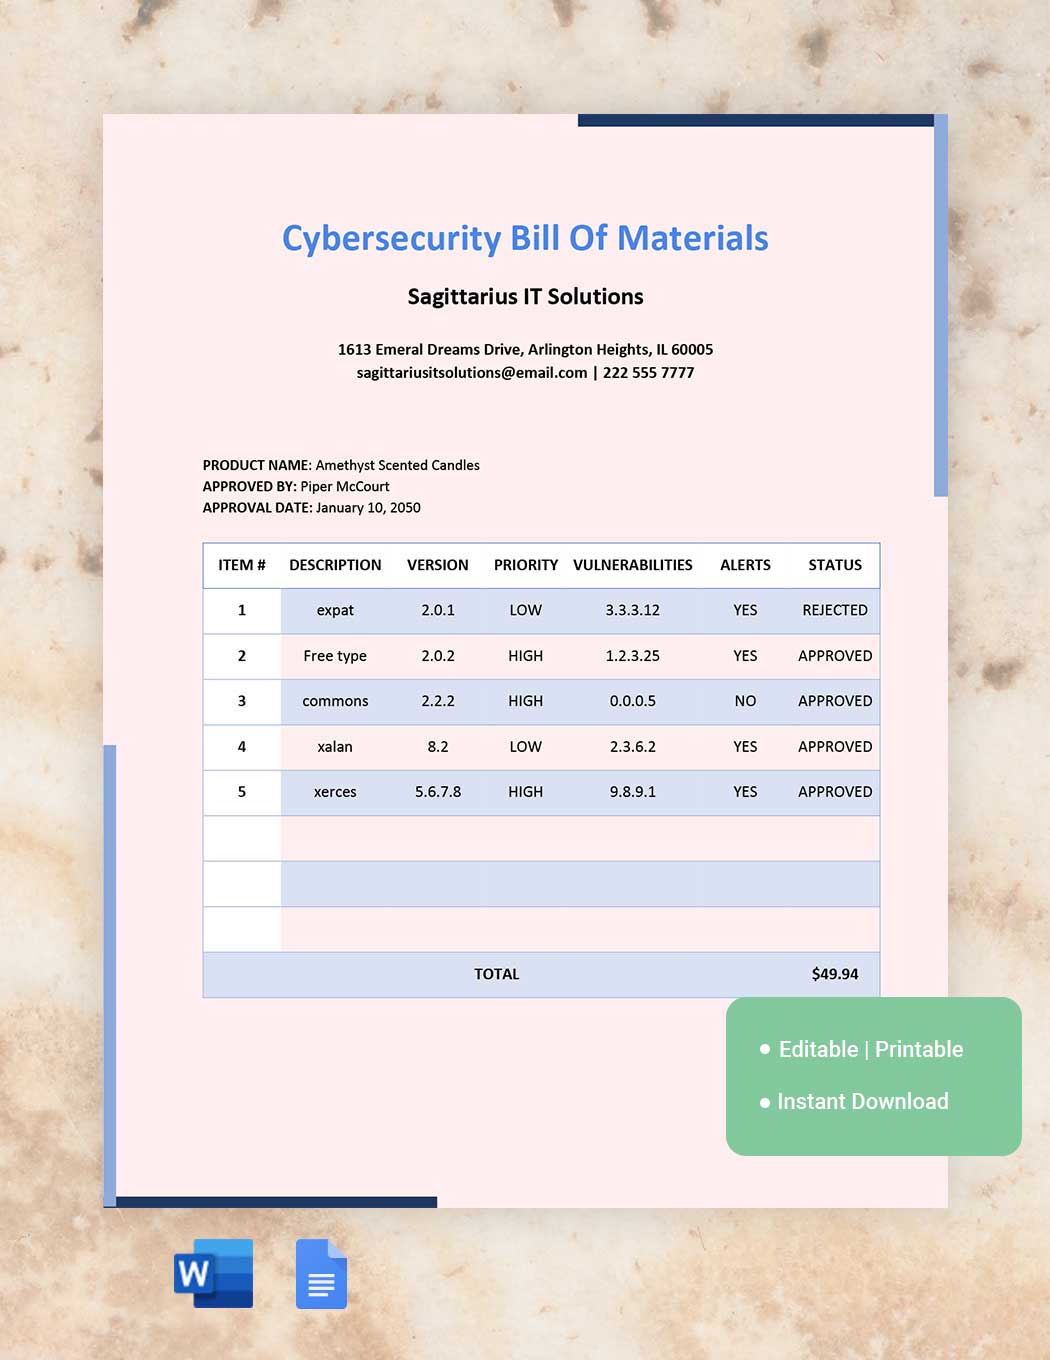 Cybersecurity Bill Of Materials Template in Word, Google Docs